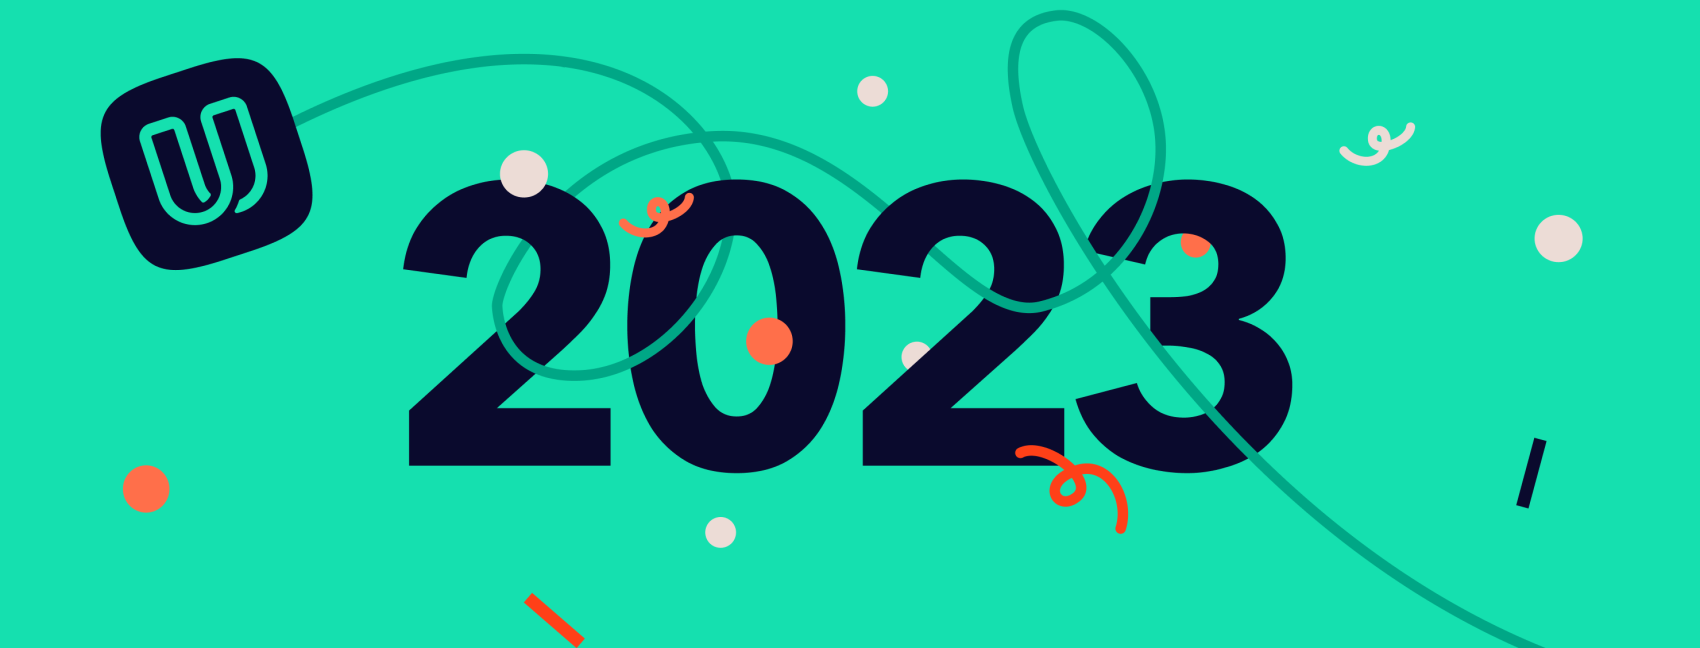 2023 with the Userbrain logo